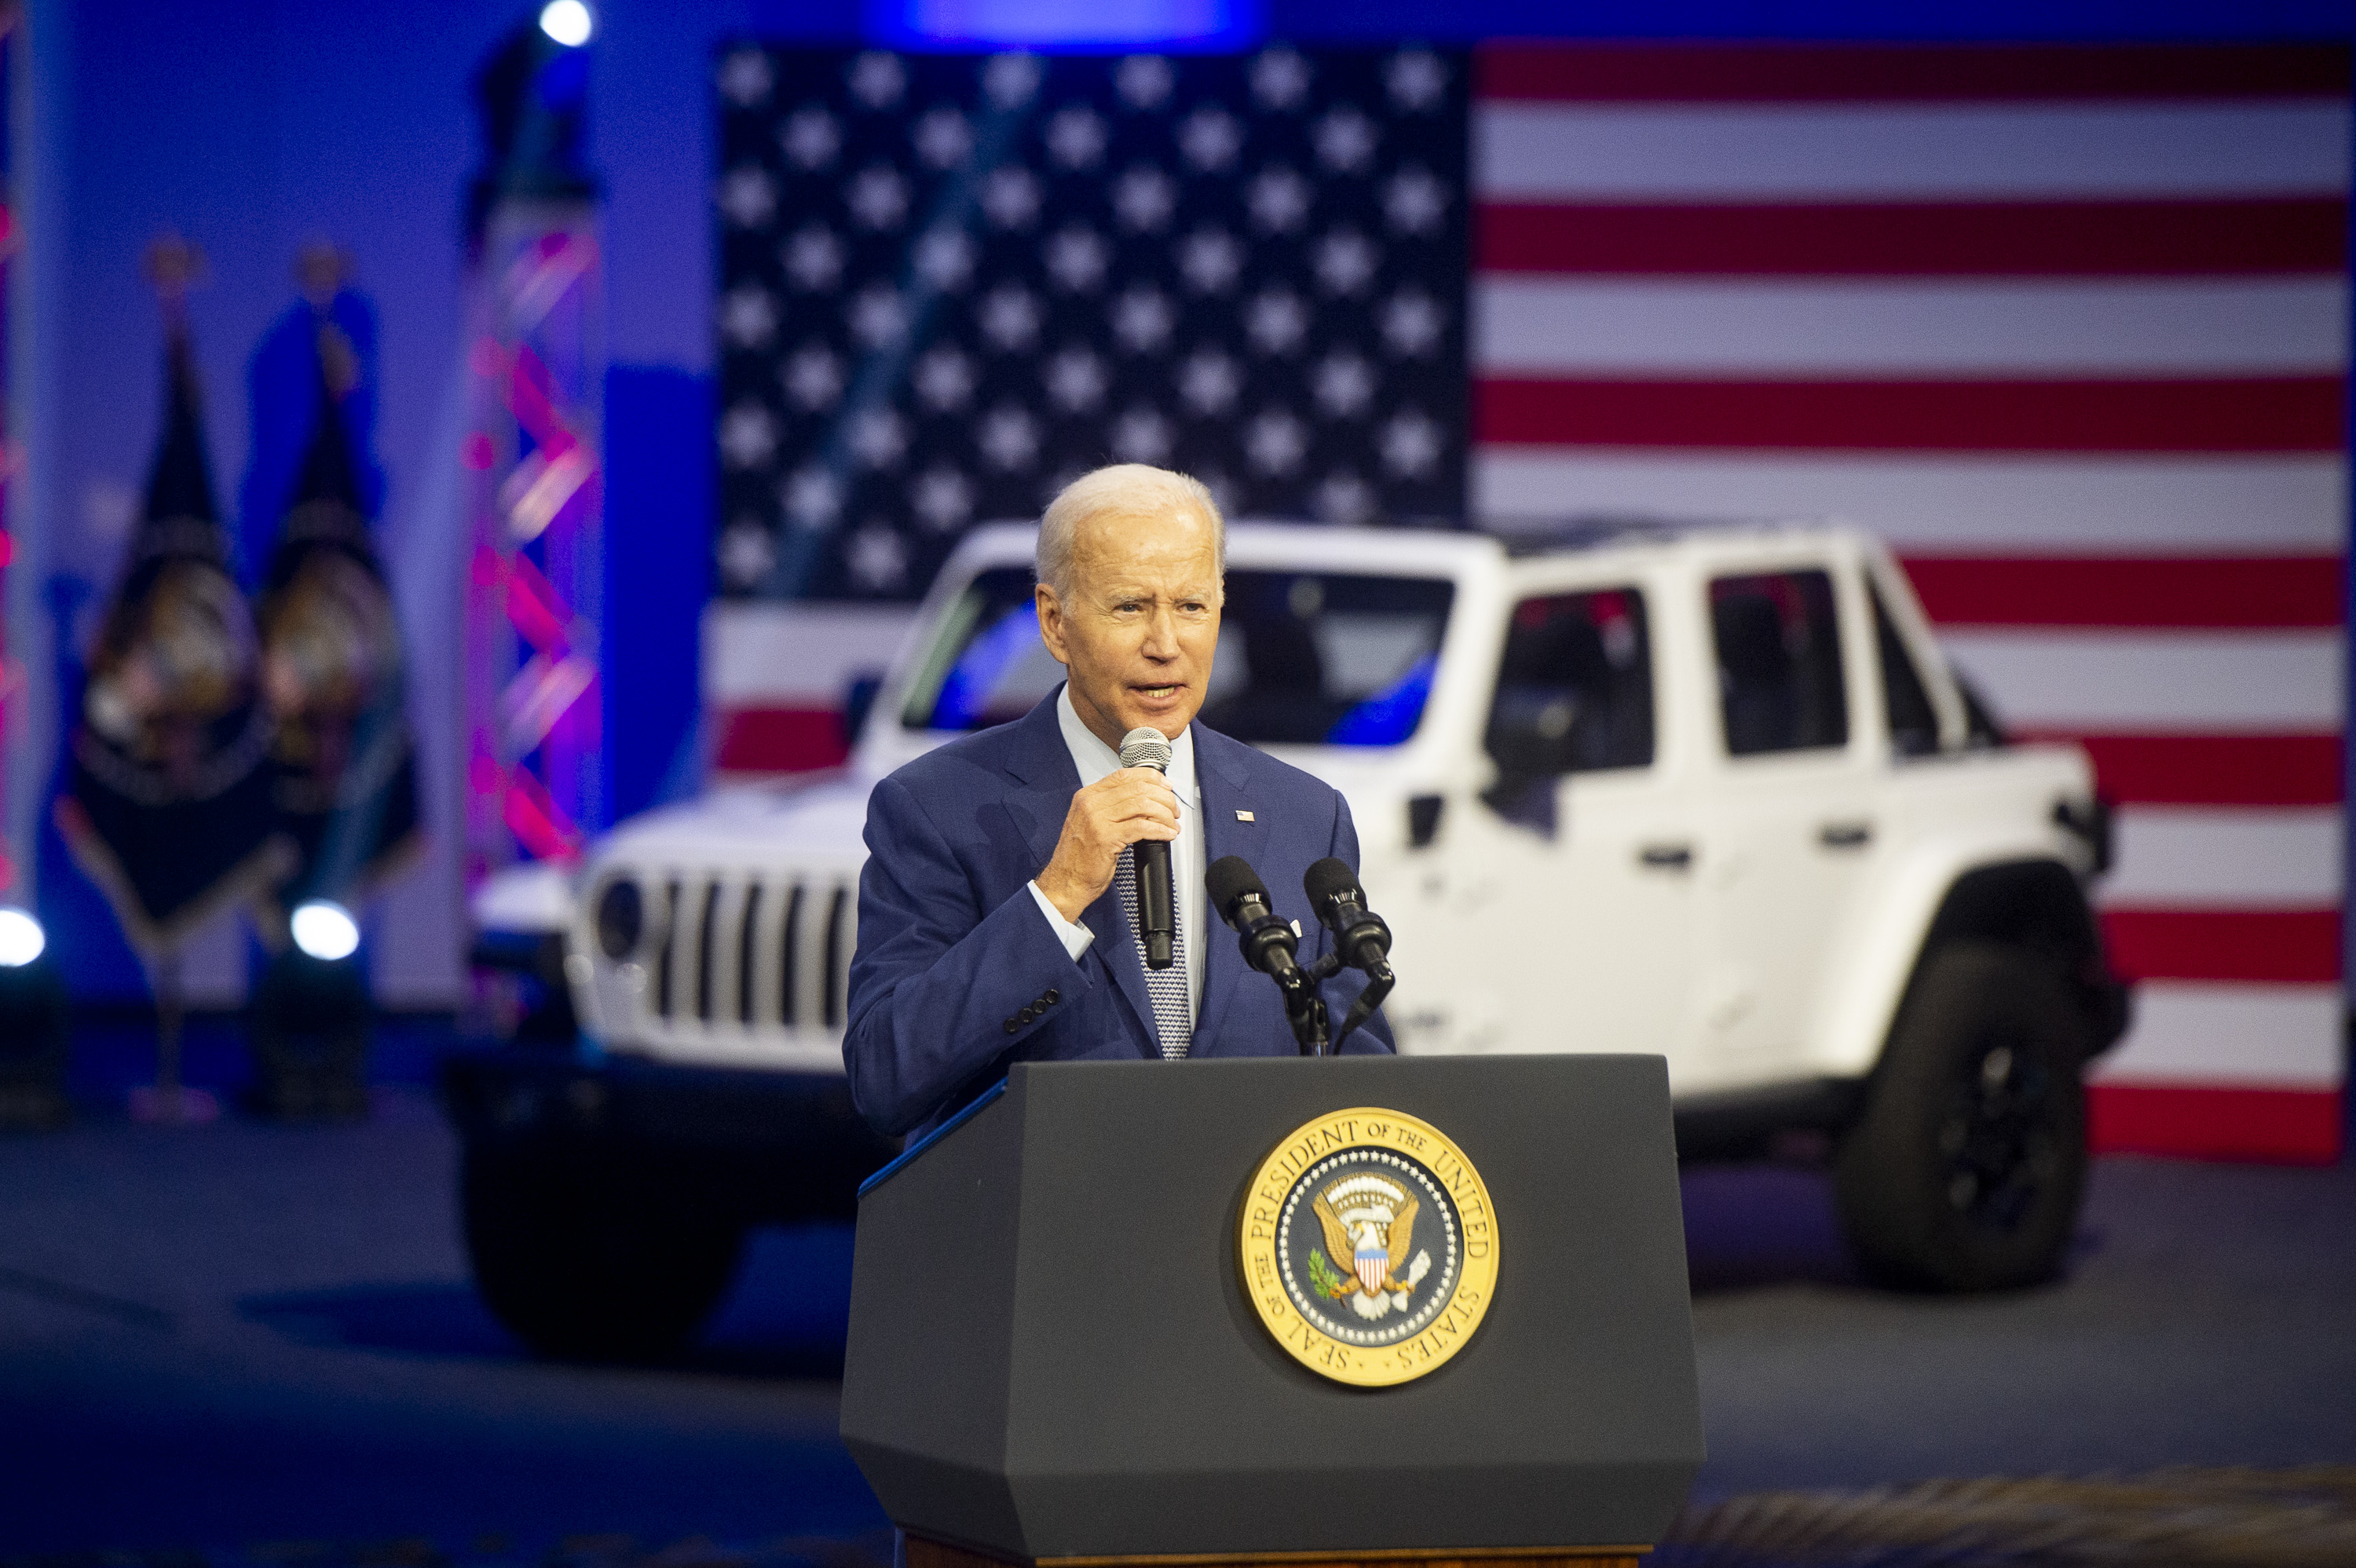 U.S. President Joe Biden speaks during the 2022 North American International Auto Show at Huntington Place in Detroit on Wednesday, Sept. 14 2022.